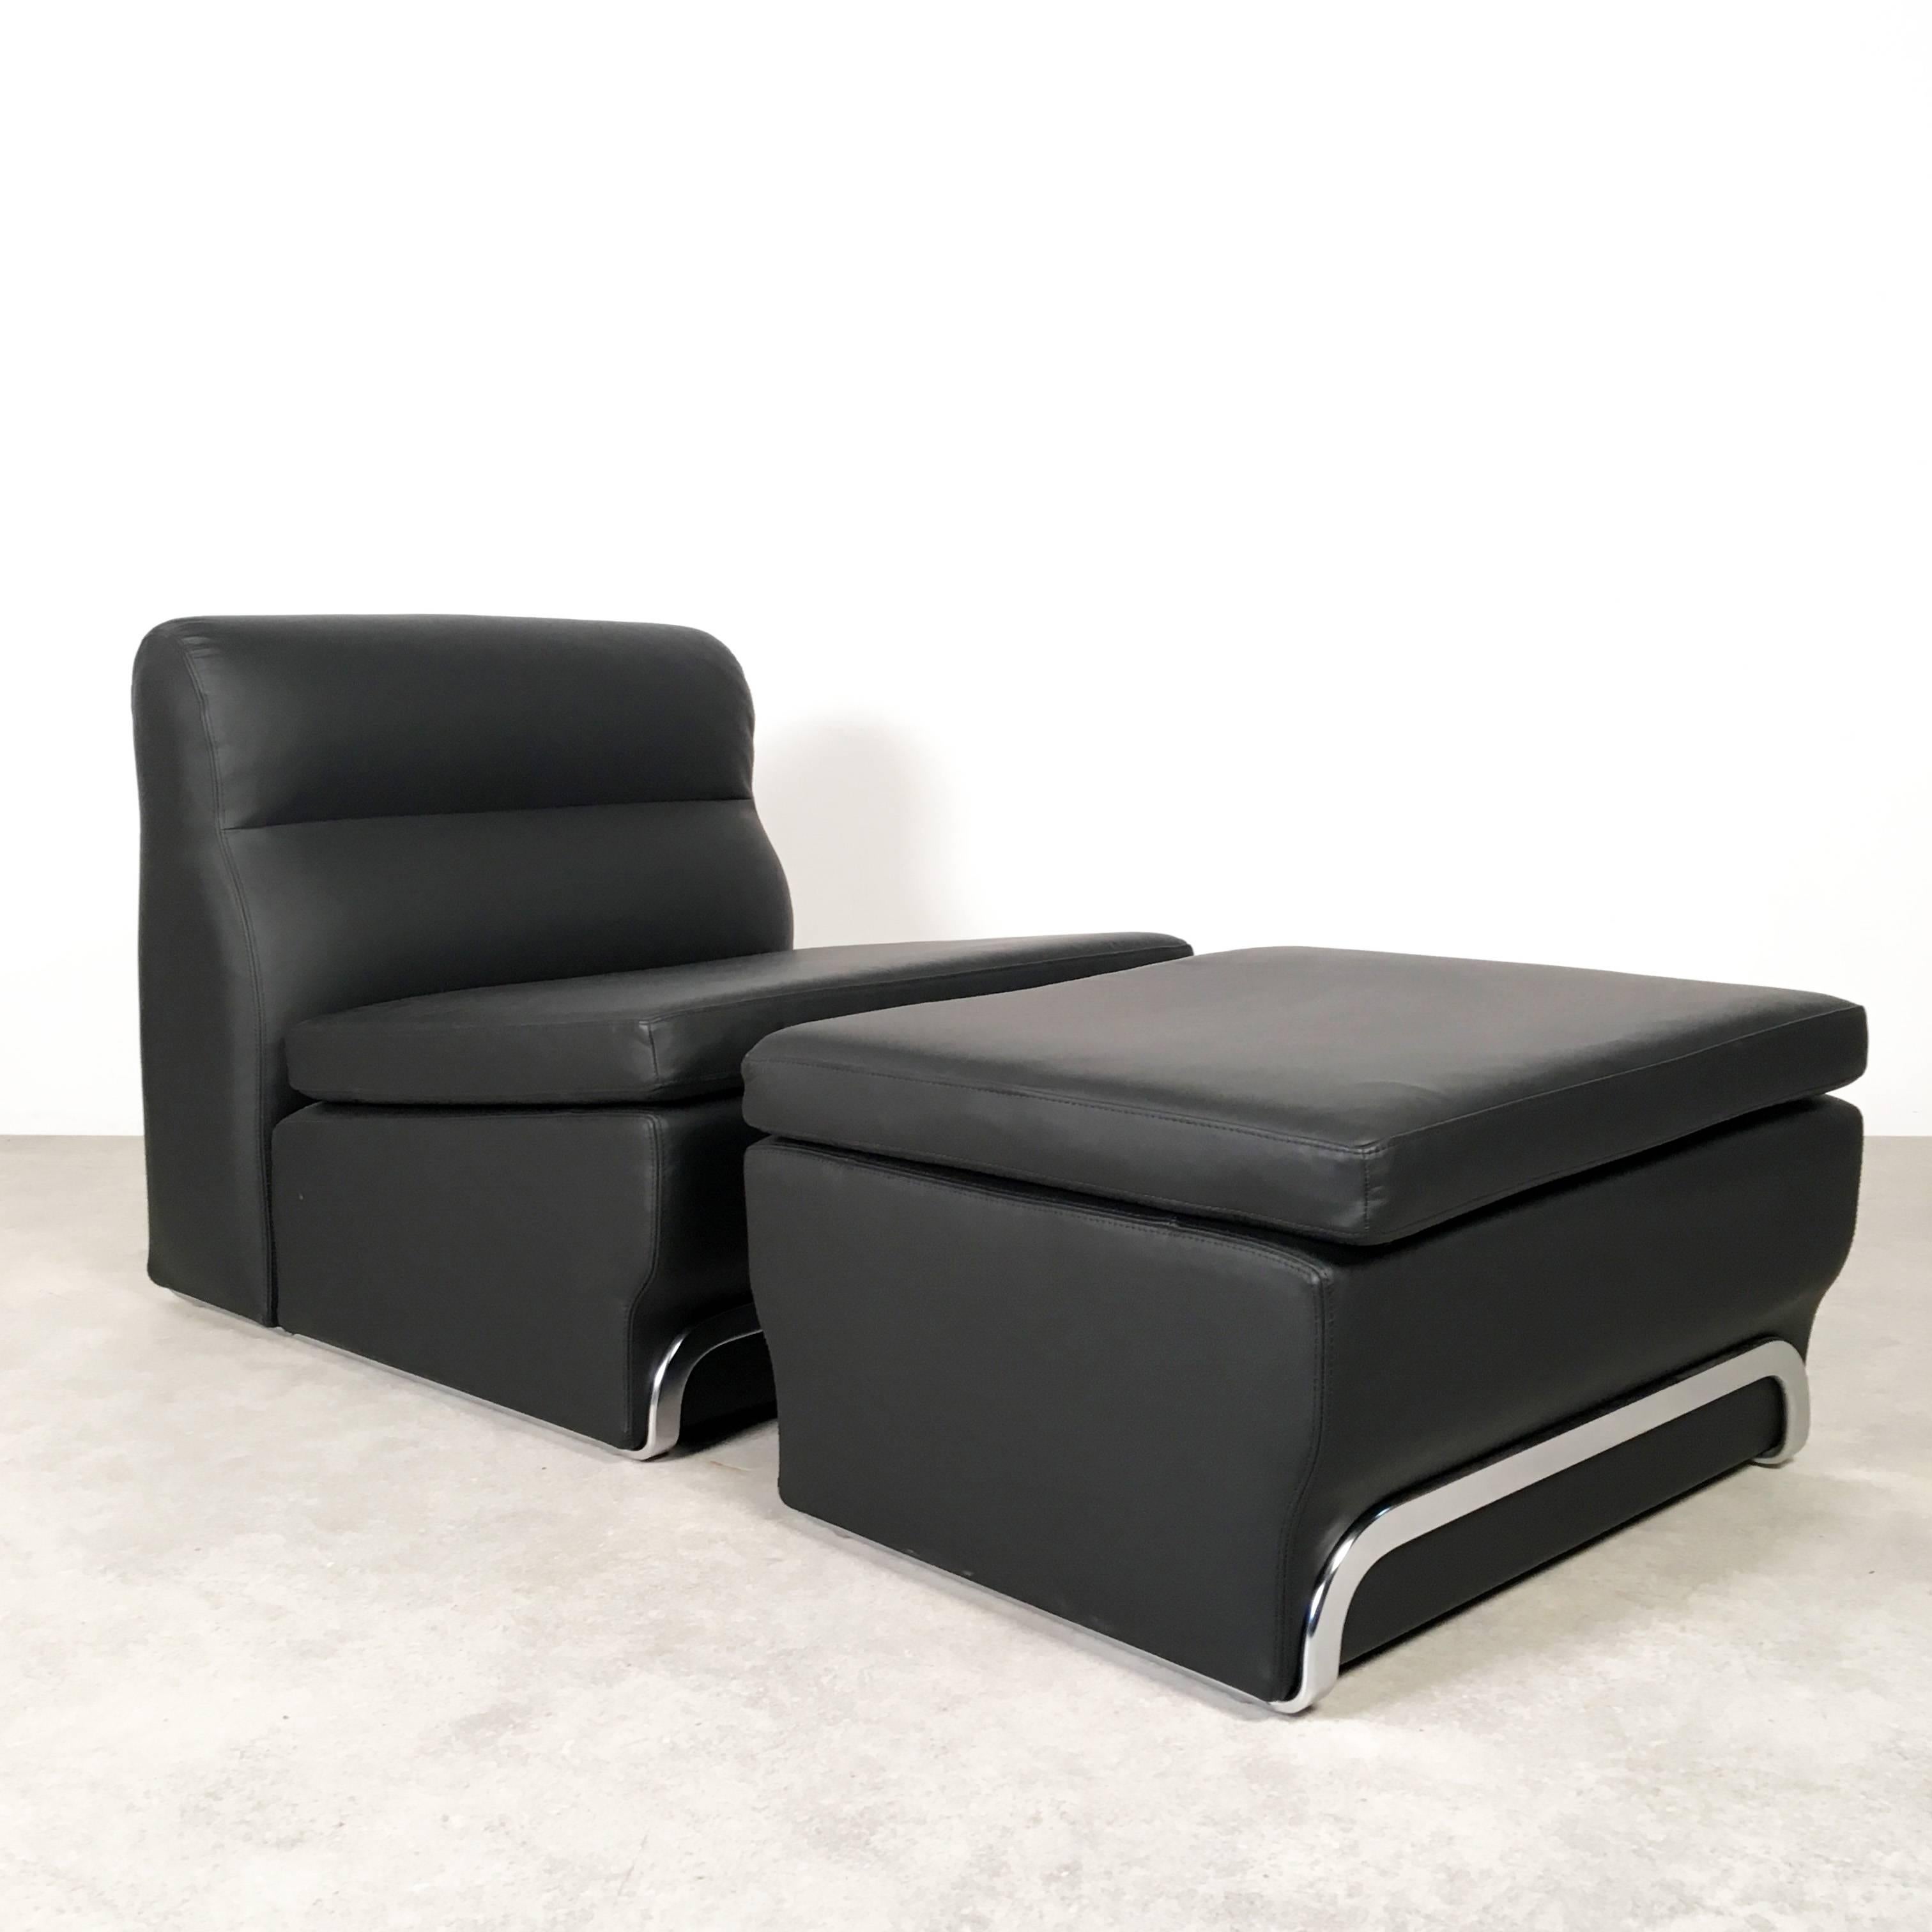 Rare lounge chair with ottoman, designed in 1972 by Horst Brüning, manufactured in Germany by Kill International. Brüning designed some of the icons of German furniture design. This chair is a perfect example of his work in the late 1960s or early